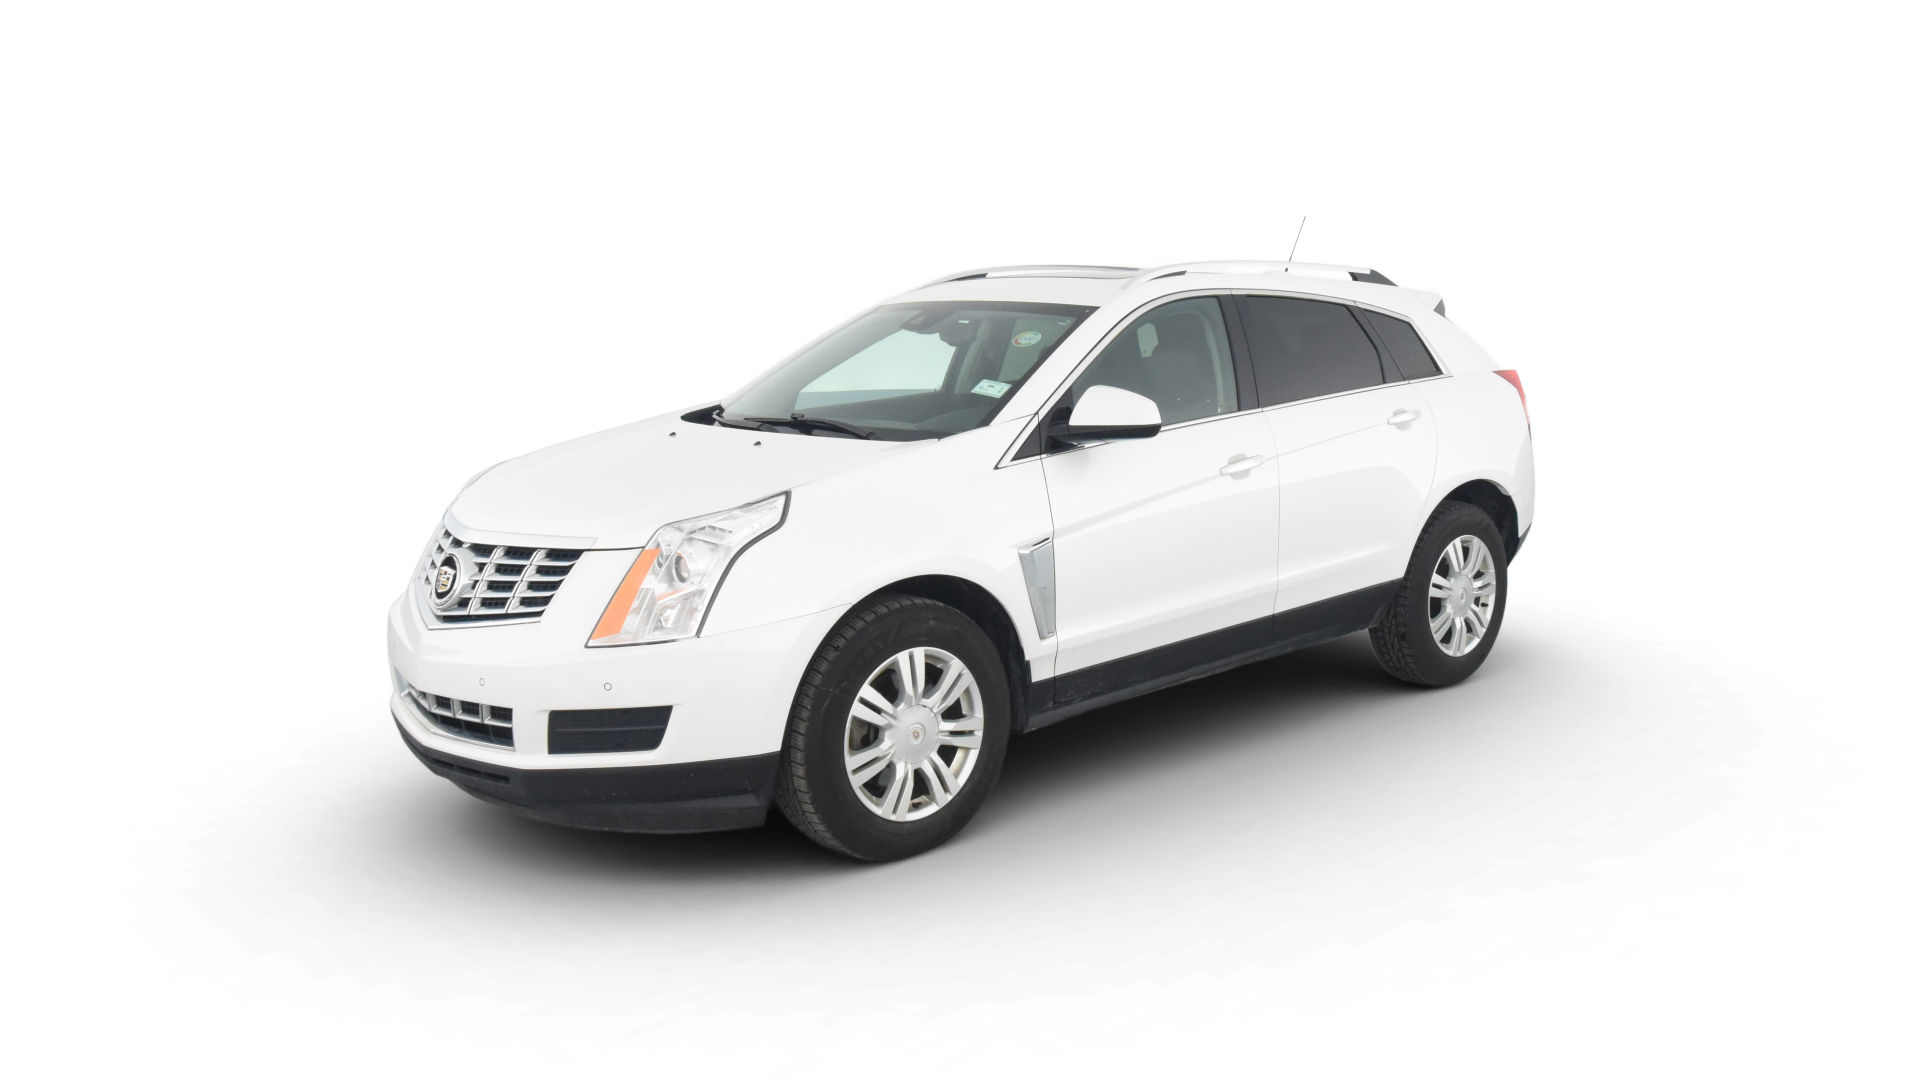 Used 2015 Cadillac SRX For Sale Online | Carvana